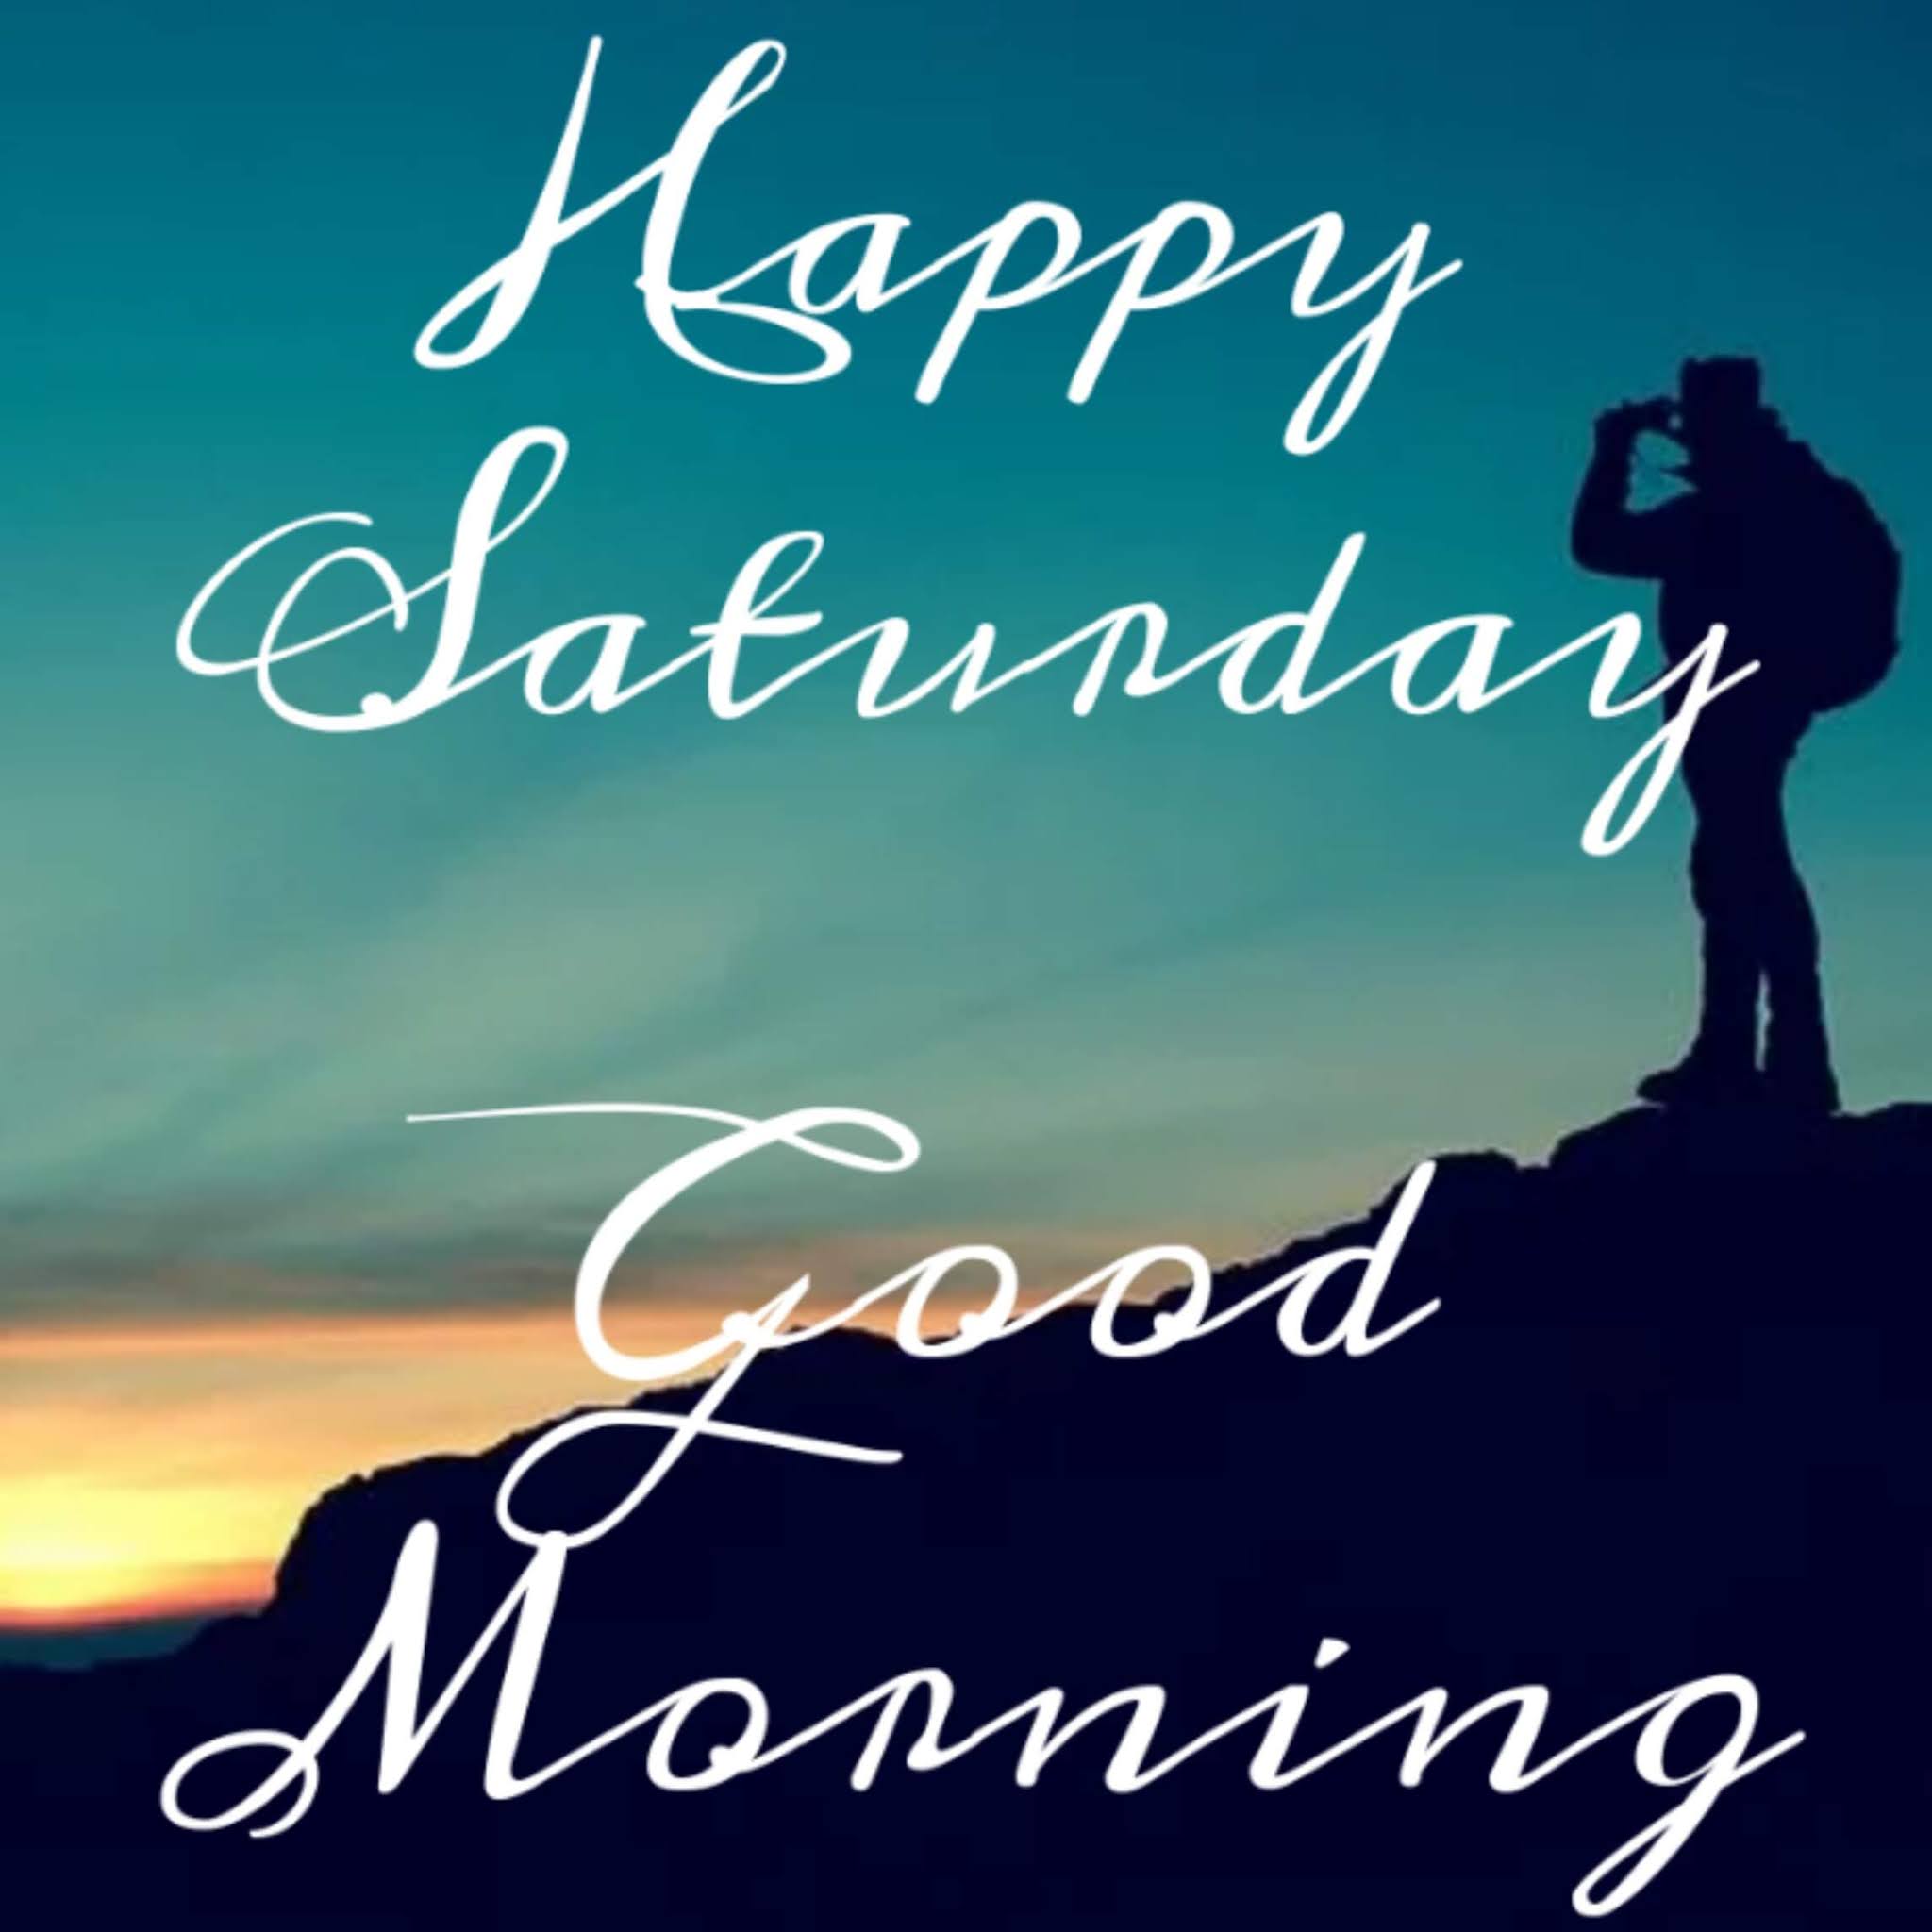 Good Morning Happy Saturday image picture photo wallpaper free download wishes image